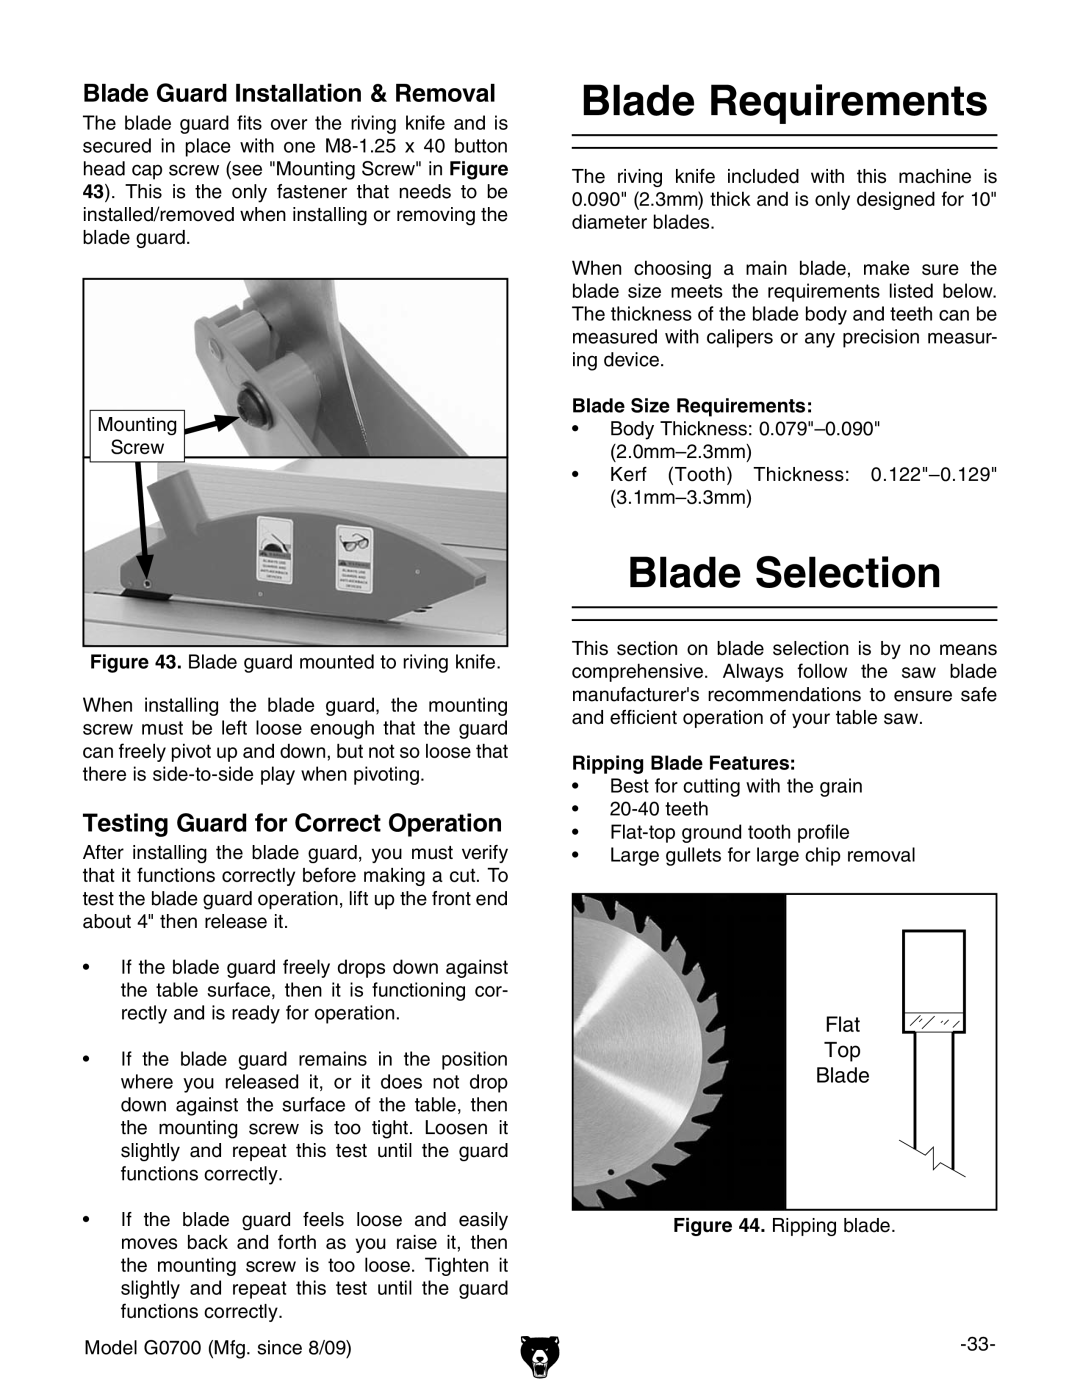 Grizzly G0700 owner manual Blade Requirements, Blade Selection, Blade Guard Installation & Removal, Flat Top Blade 